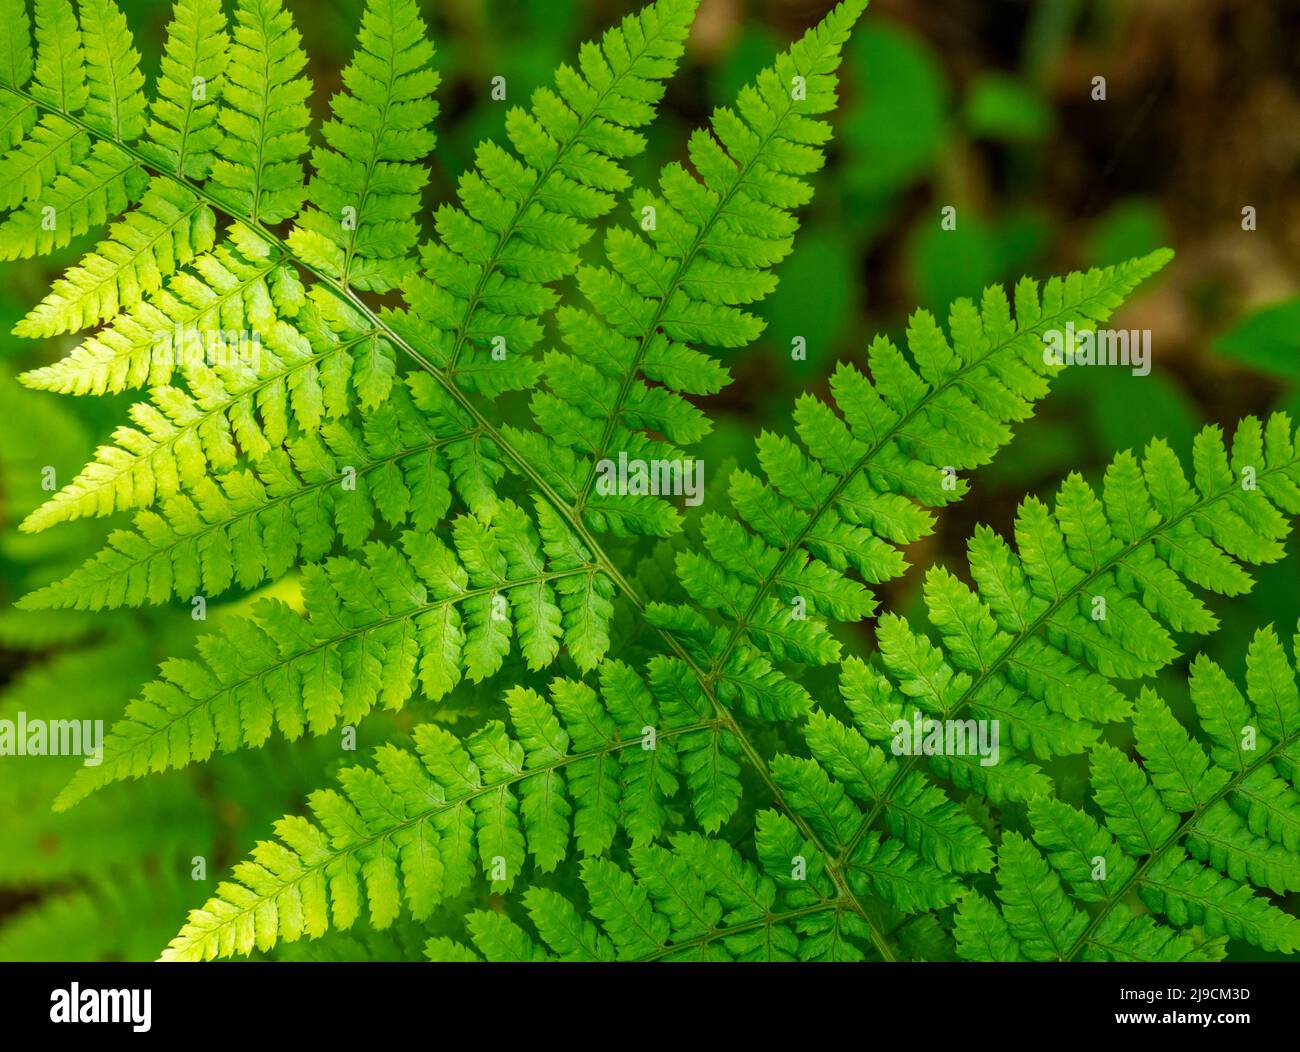 Single fern leaf showing its structure, with sunlight reflecting on the fronds Stock Photo